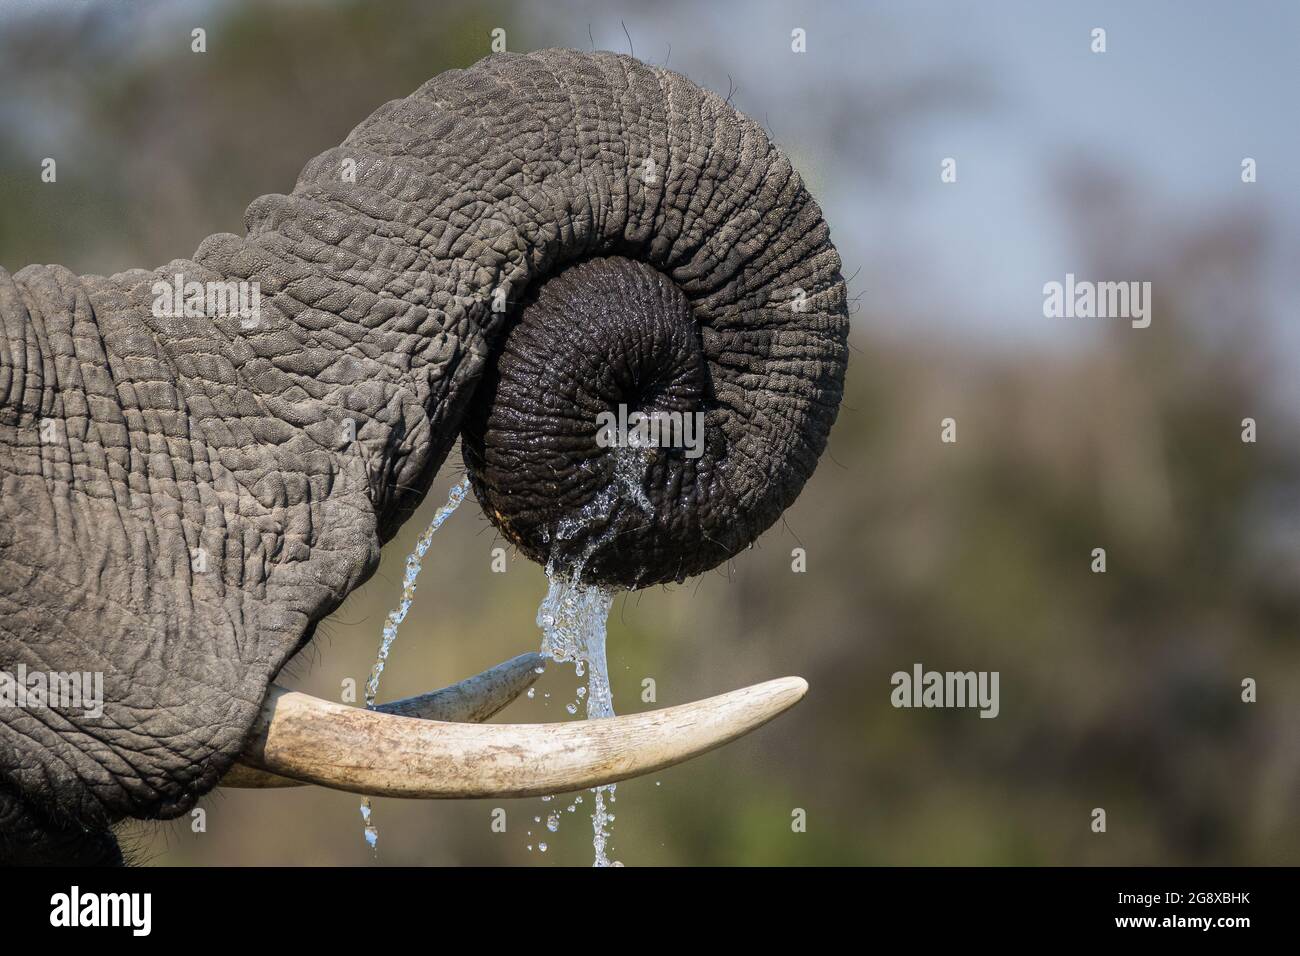 An elephant's trunk, Loxodonta africana, coiled together with water dripping off Stock Photo